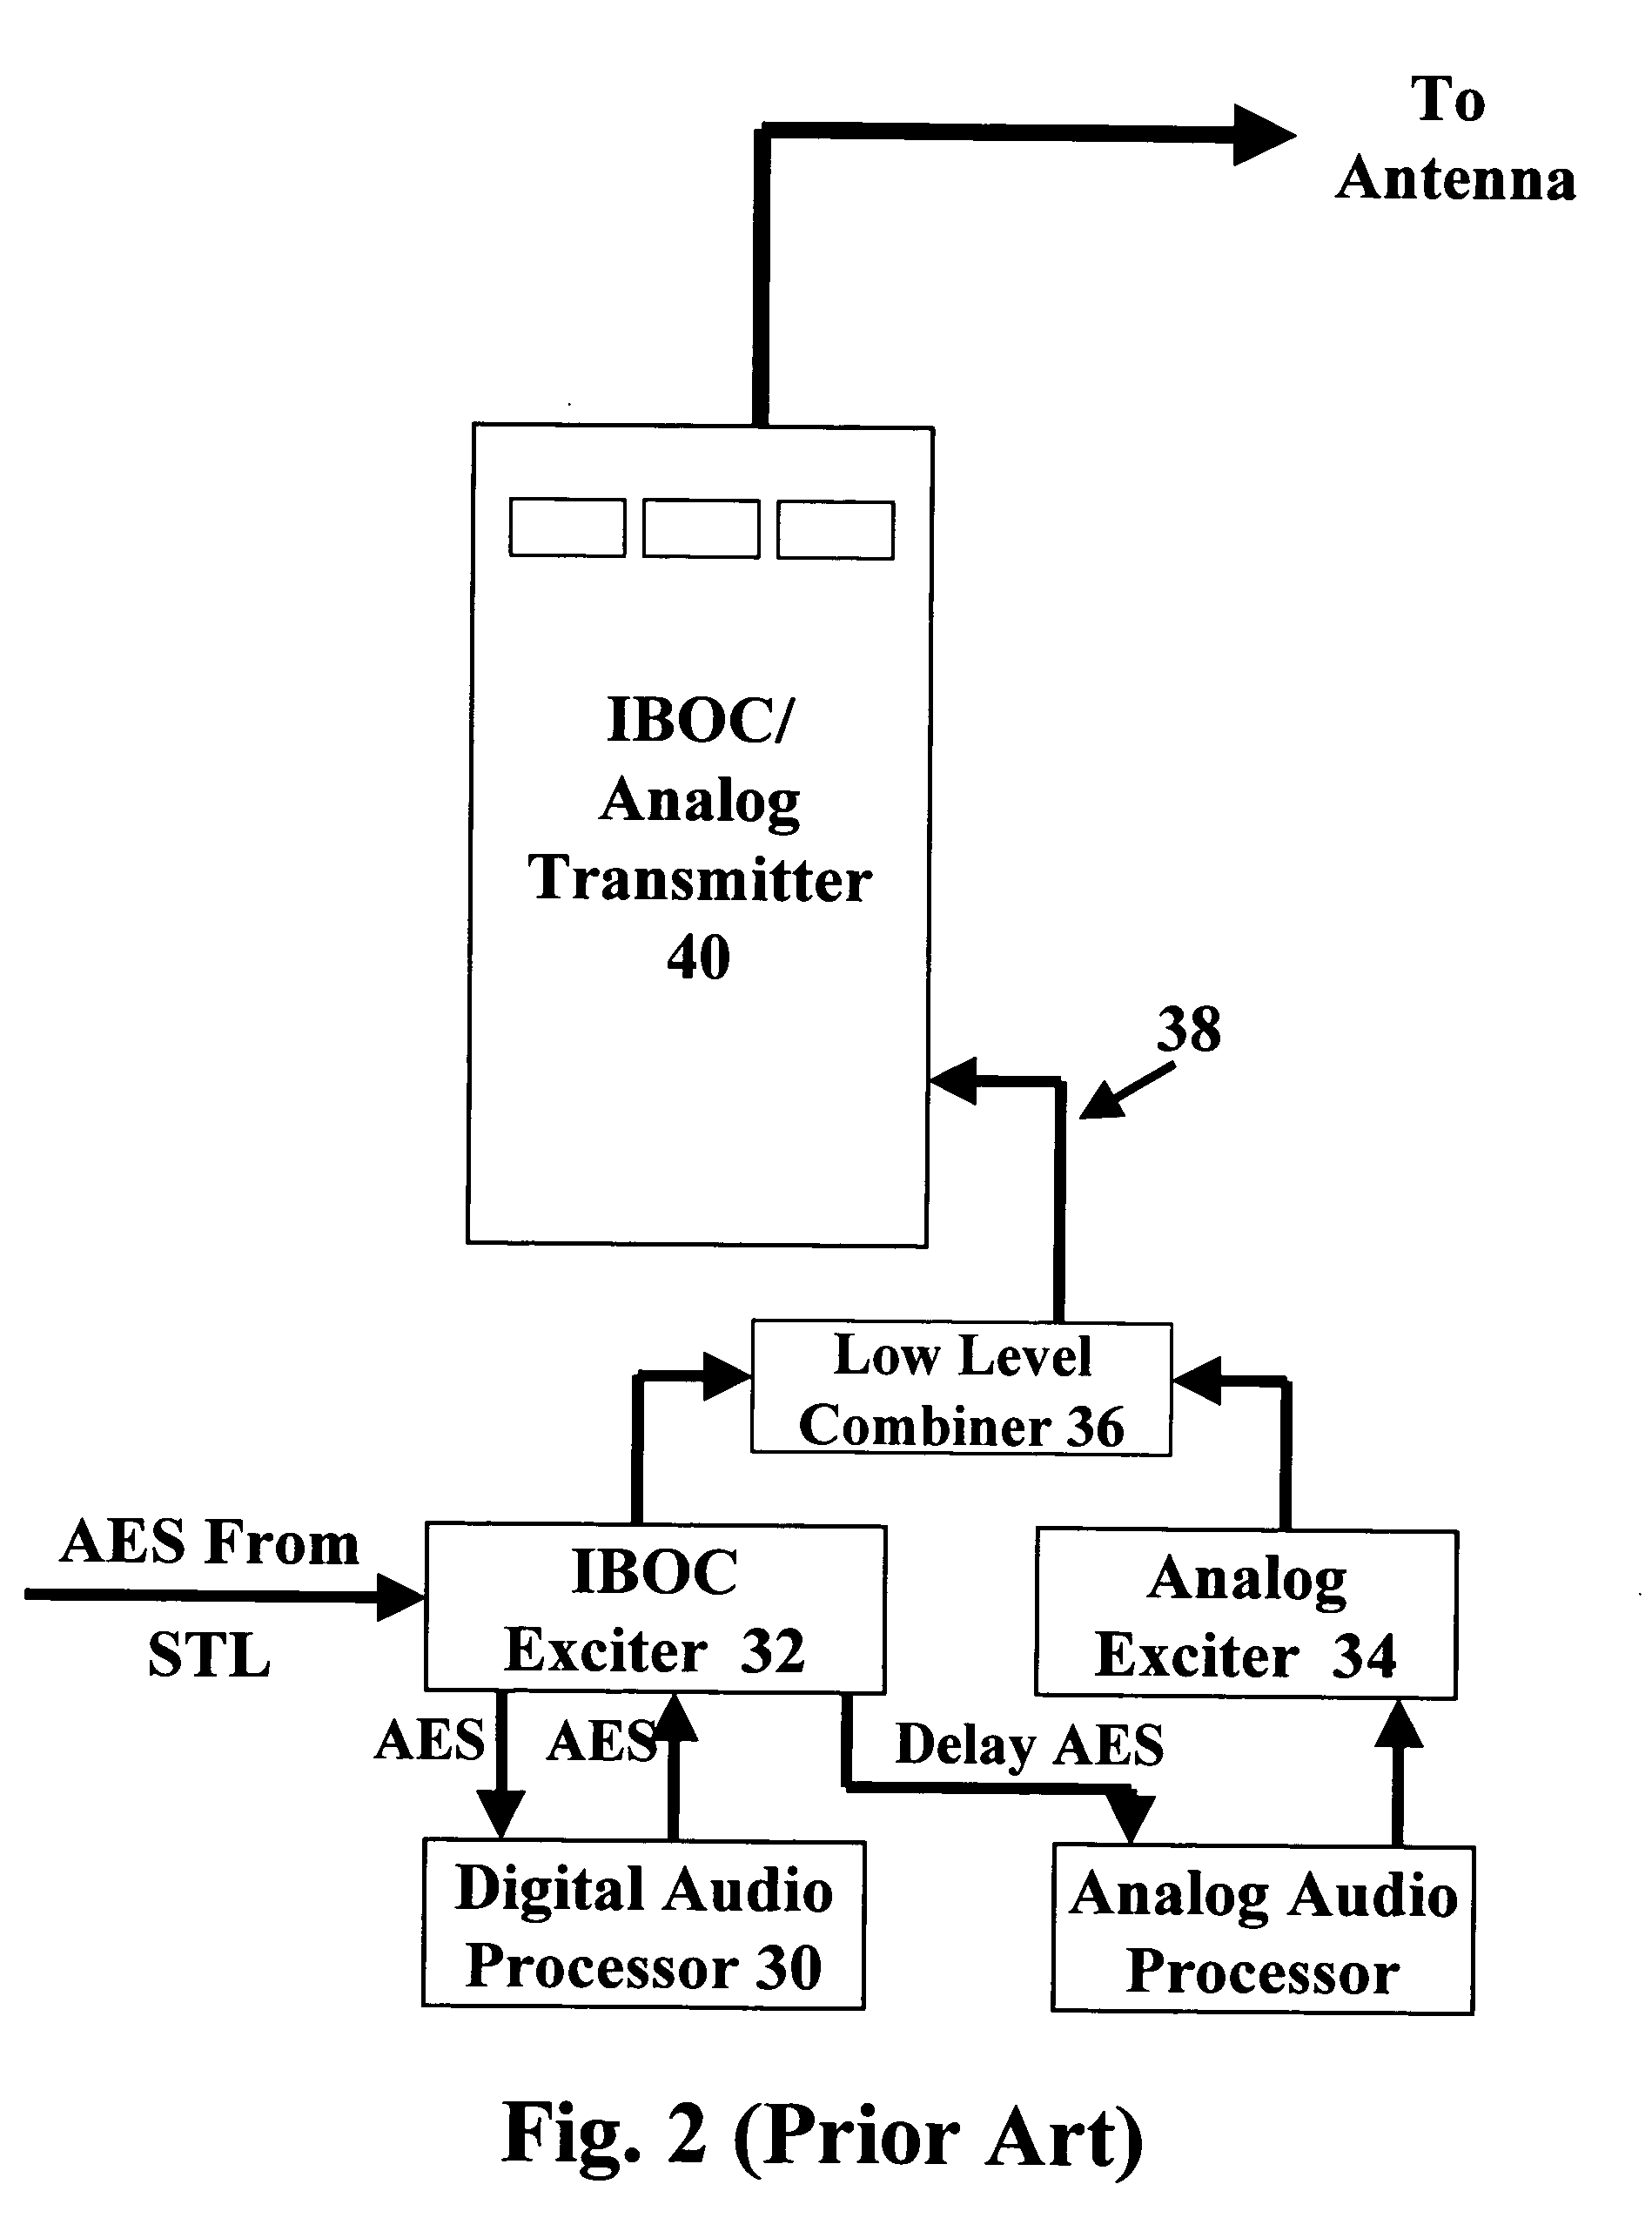 HD digital radio combining methods and systems